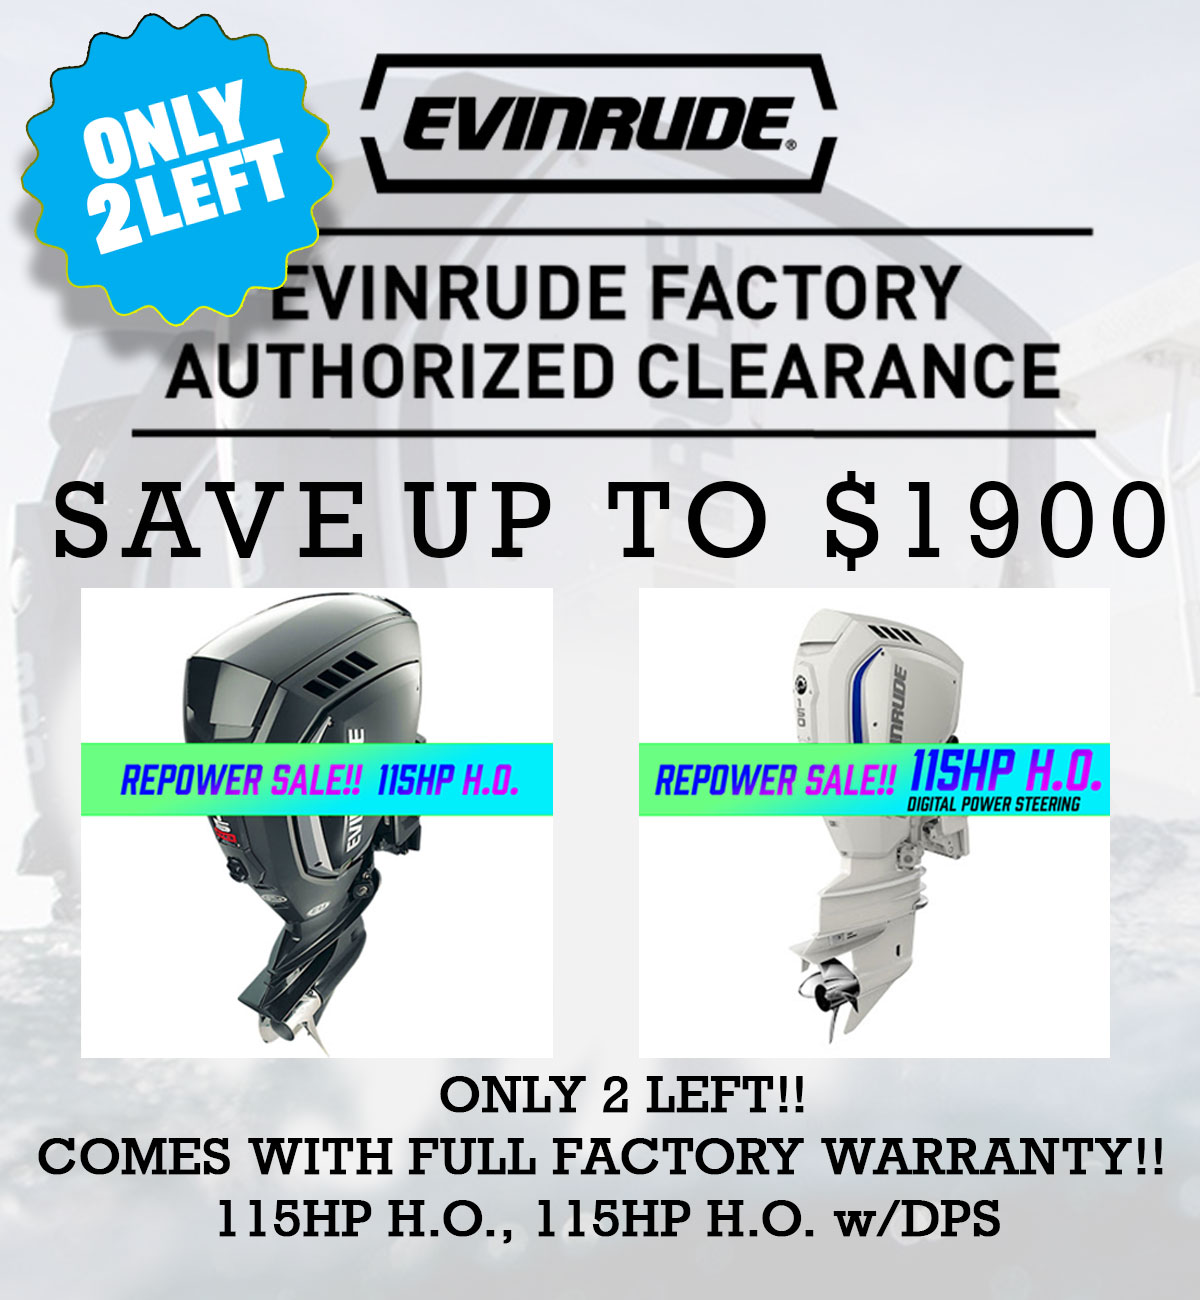 Evinrude Factory Authorized Clearance